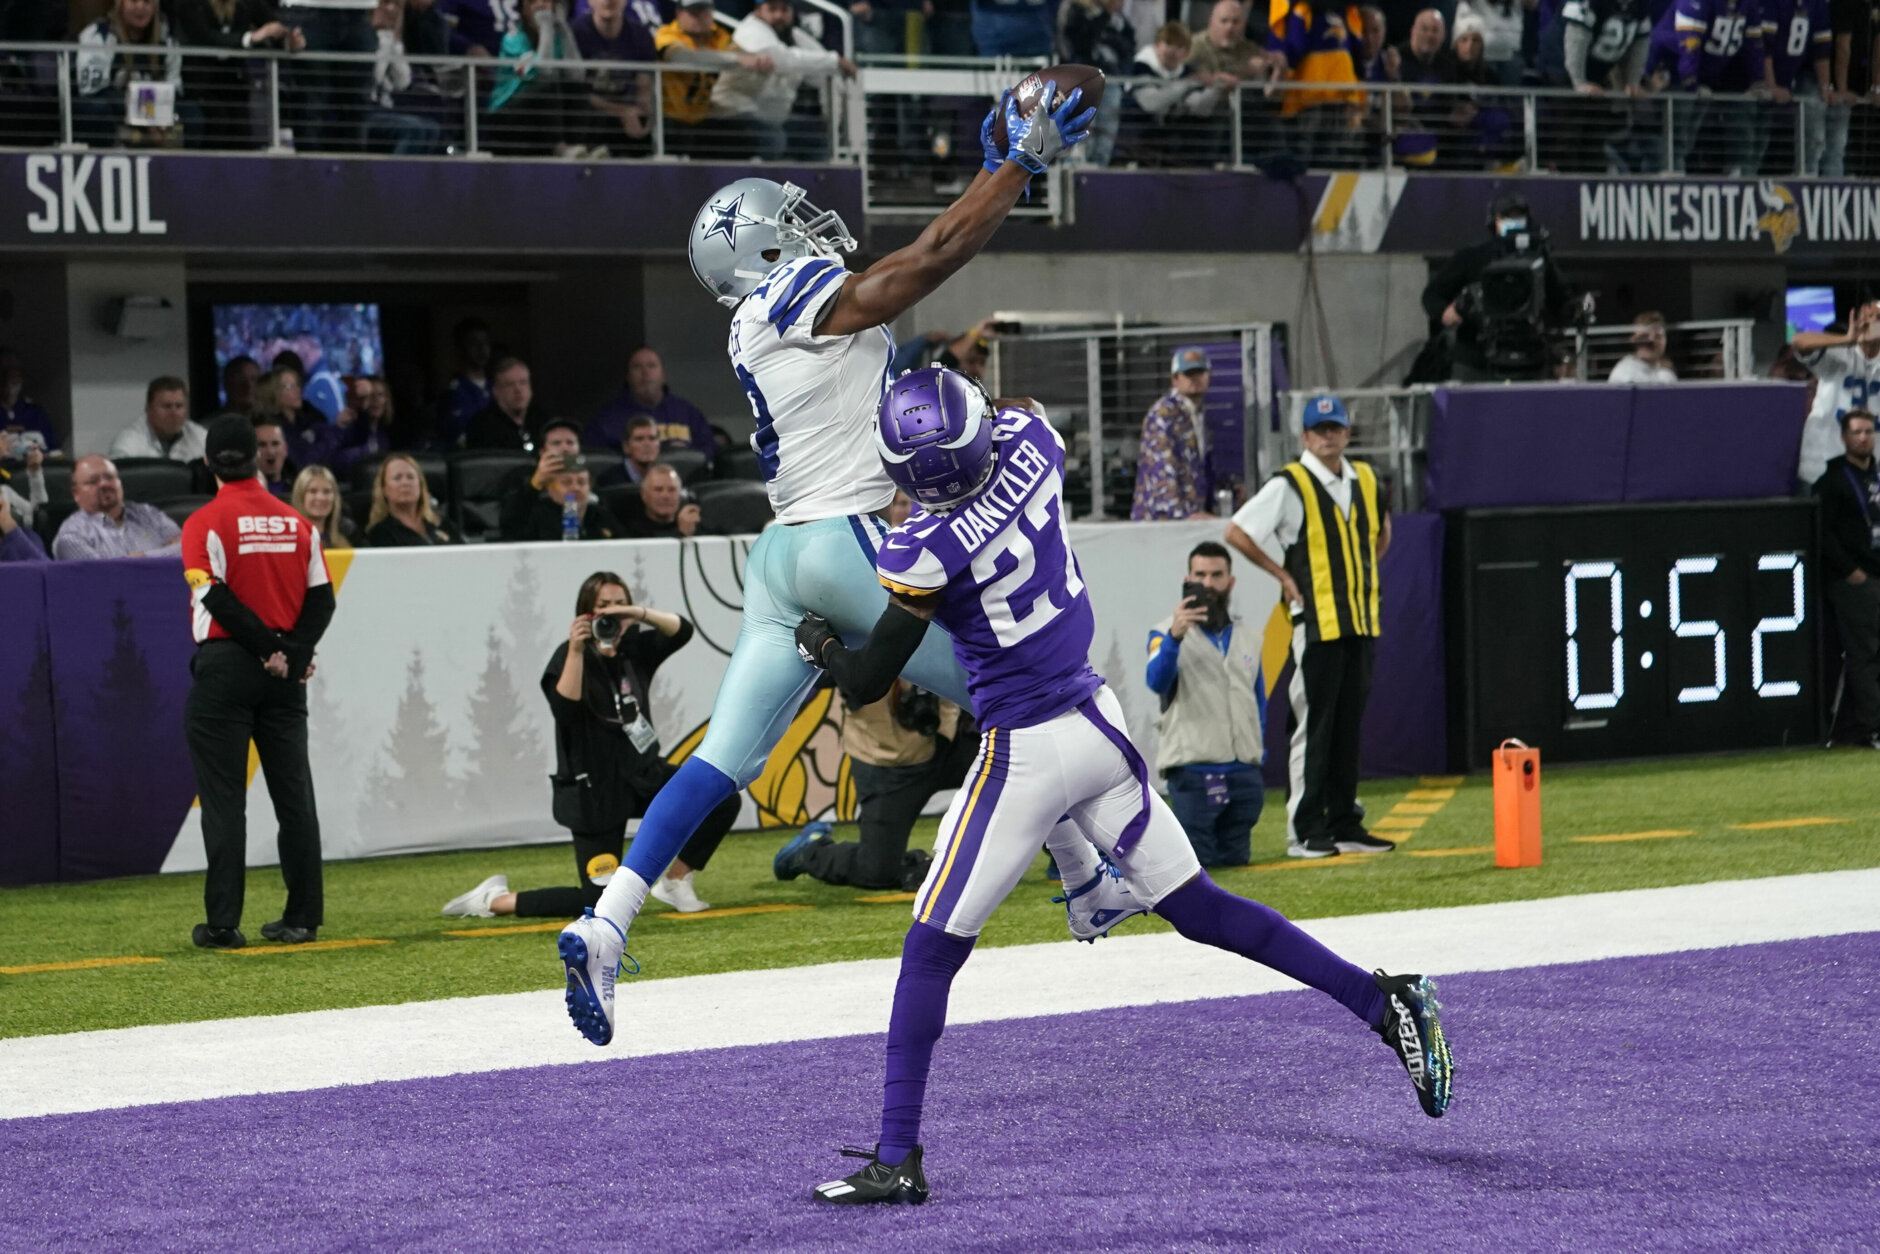 <p><em><strong>Cowboys 20</strong></em><br />
<em><strong>Vikings 16</strong></em></p>
<p>I really, really hate to say this — and I just threw up in my mouth a little even thinking it — but Dallas is starting to feel a lot like a team of destiny. Given the way the Cowboys folded last year after Dak Prescott&#8217;s season-ending injury, going on the road in prime-time with Cooper f-ing Rush throwing a game-winning dime to Amari Cooper is the kind of thing championship teams do.</p>
<p>Now, if you&#8217;ll excuse me, I&#8217;m going to take multiple showers to try and wash off this shame.</p>
<blockquote class="twitter-tweet tw-align-center">
<p dir="ltr" lang="en">Dallas <a href="https://twitter.com/hashtag/Cowboys?src=hash&amp;ref_src=twsrc%5Etfw">#Cowboys</a> fans be singing like <a href="https://t.co/N2Nt98yfQV">https://t.co/N2Nt98yfQV</a></p>
<p>— Rob Woodfork (@RobWoodfork) <a href="https://twitter.com/RobWoodfork/status/1455022790638190603?ref_src=twsrc%5Etfw">Nov. 1, 2021</a></p></blockquote>
<p><script async src="https://platform.twitter.com/widgets.js" charset="utf-8"></script></p>
